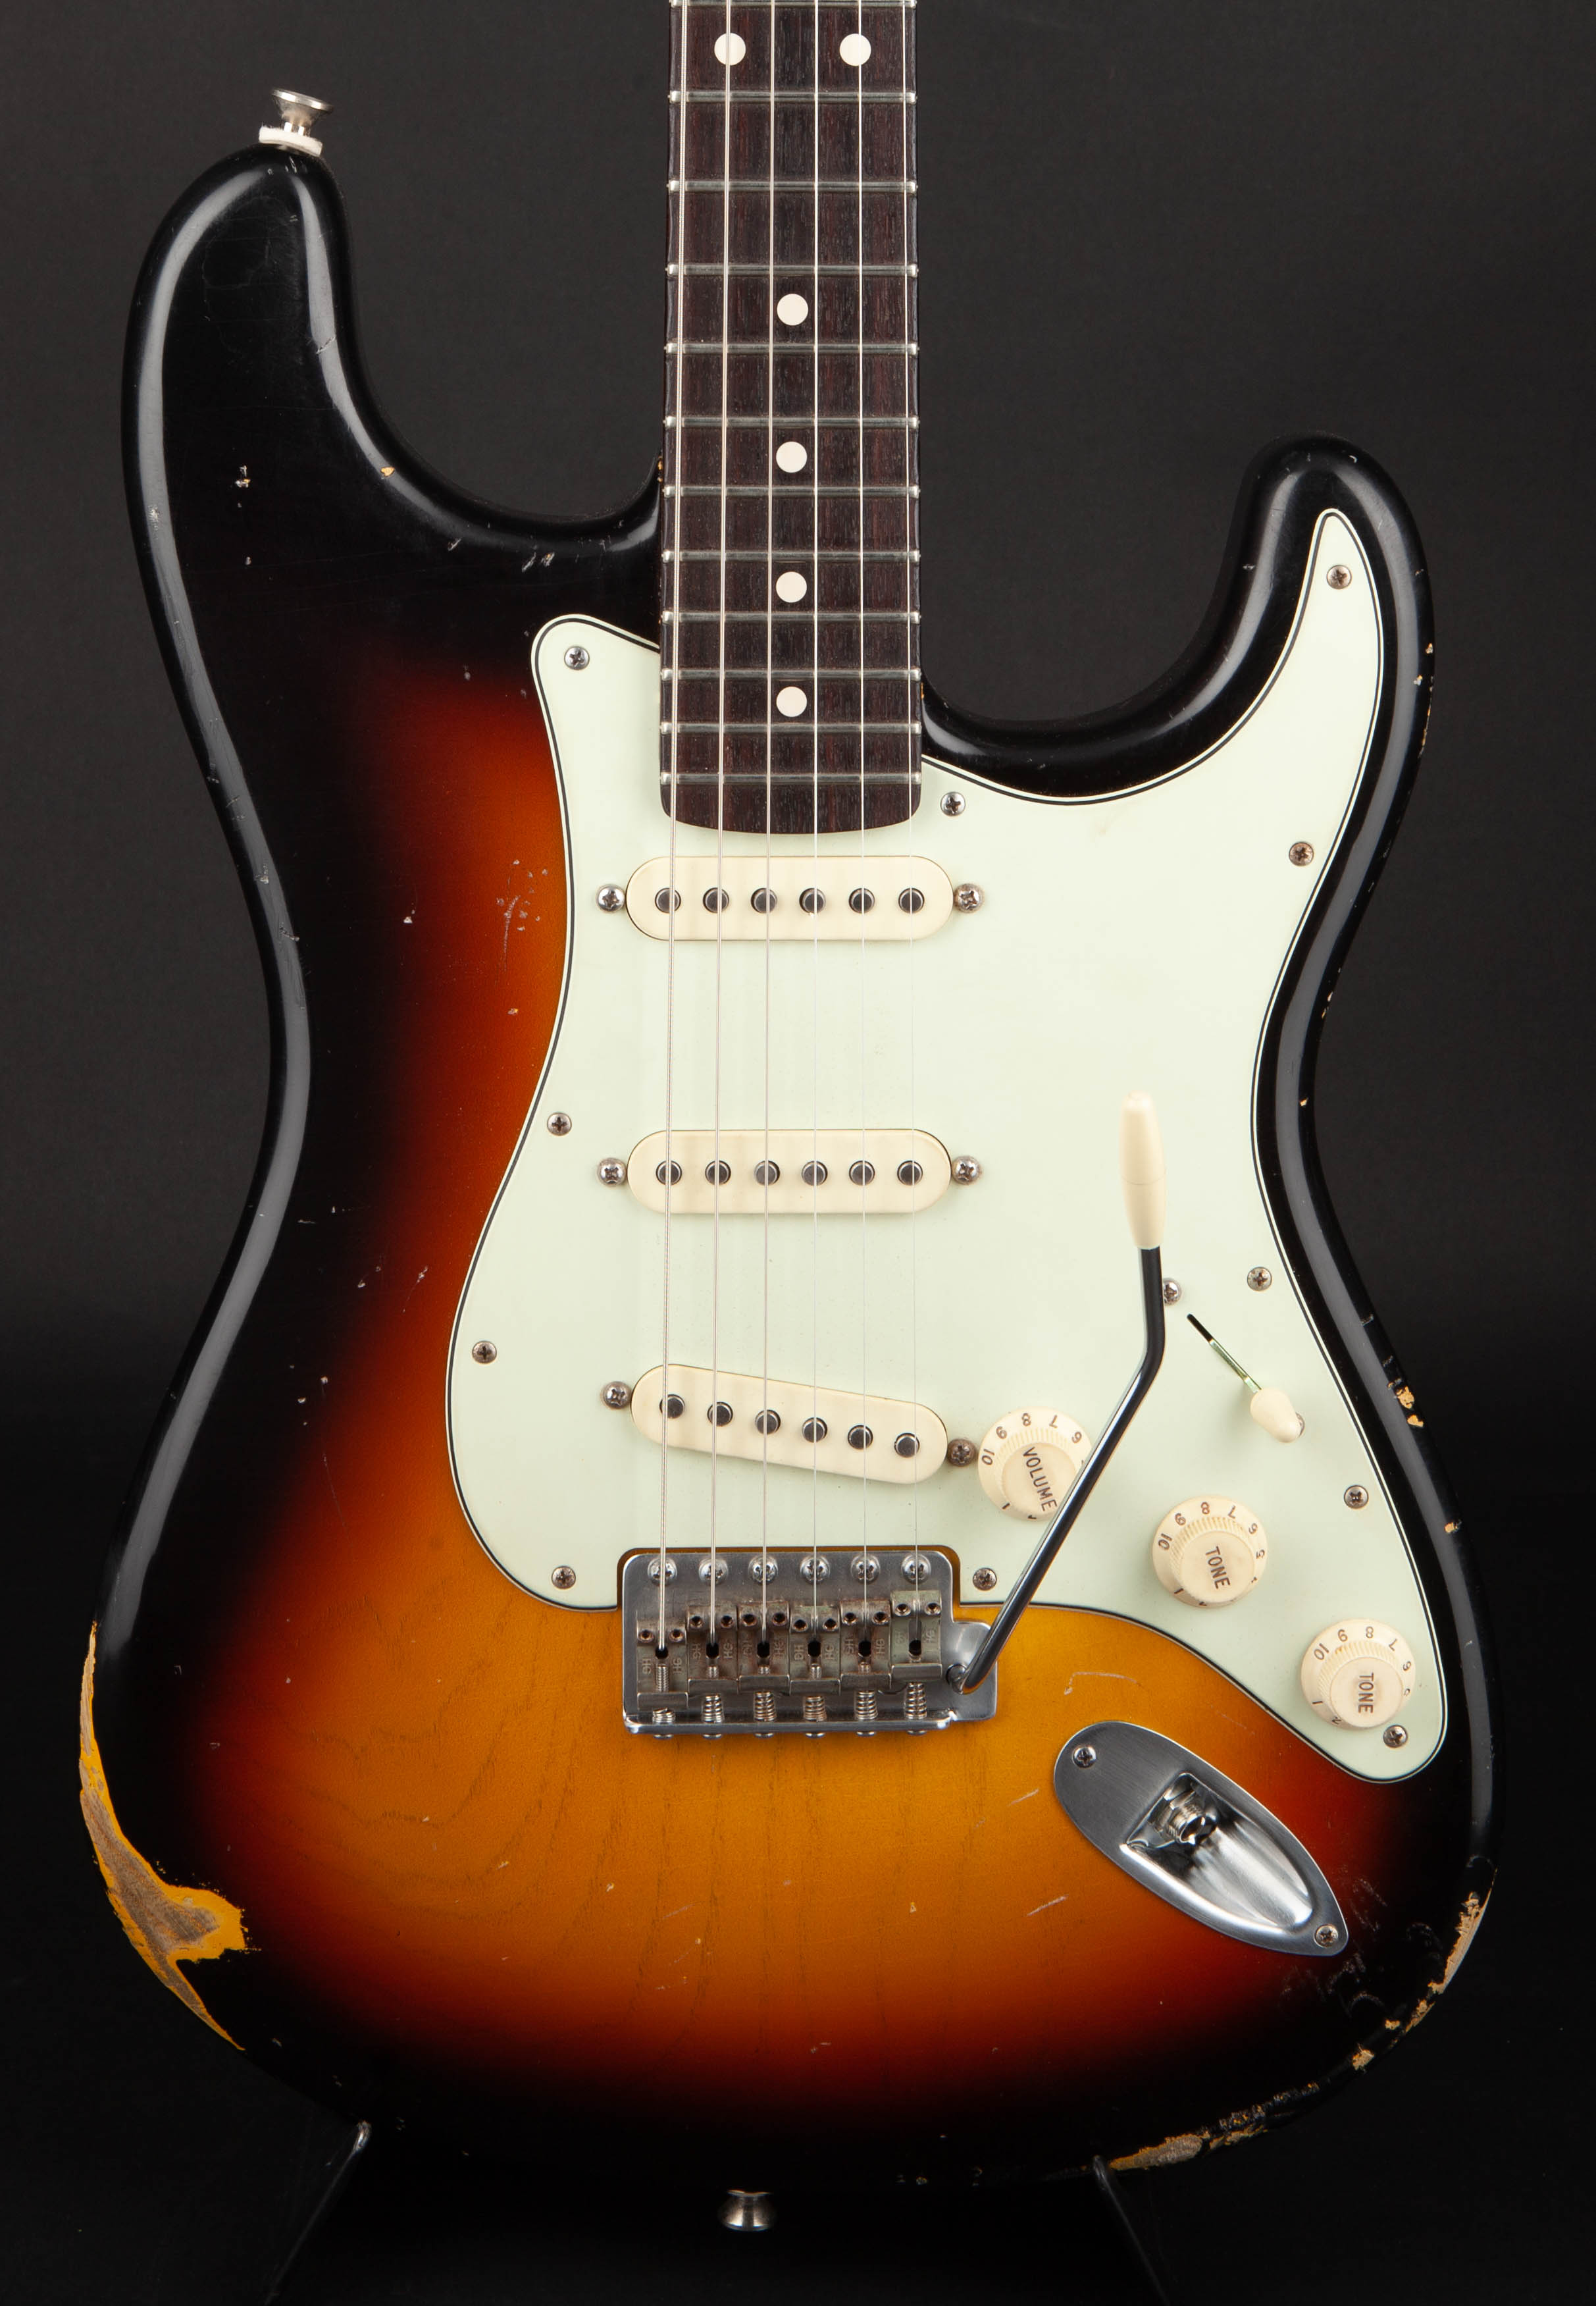 Smitty Guitars Classic S Sunburst with Flame Neck